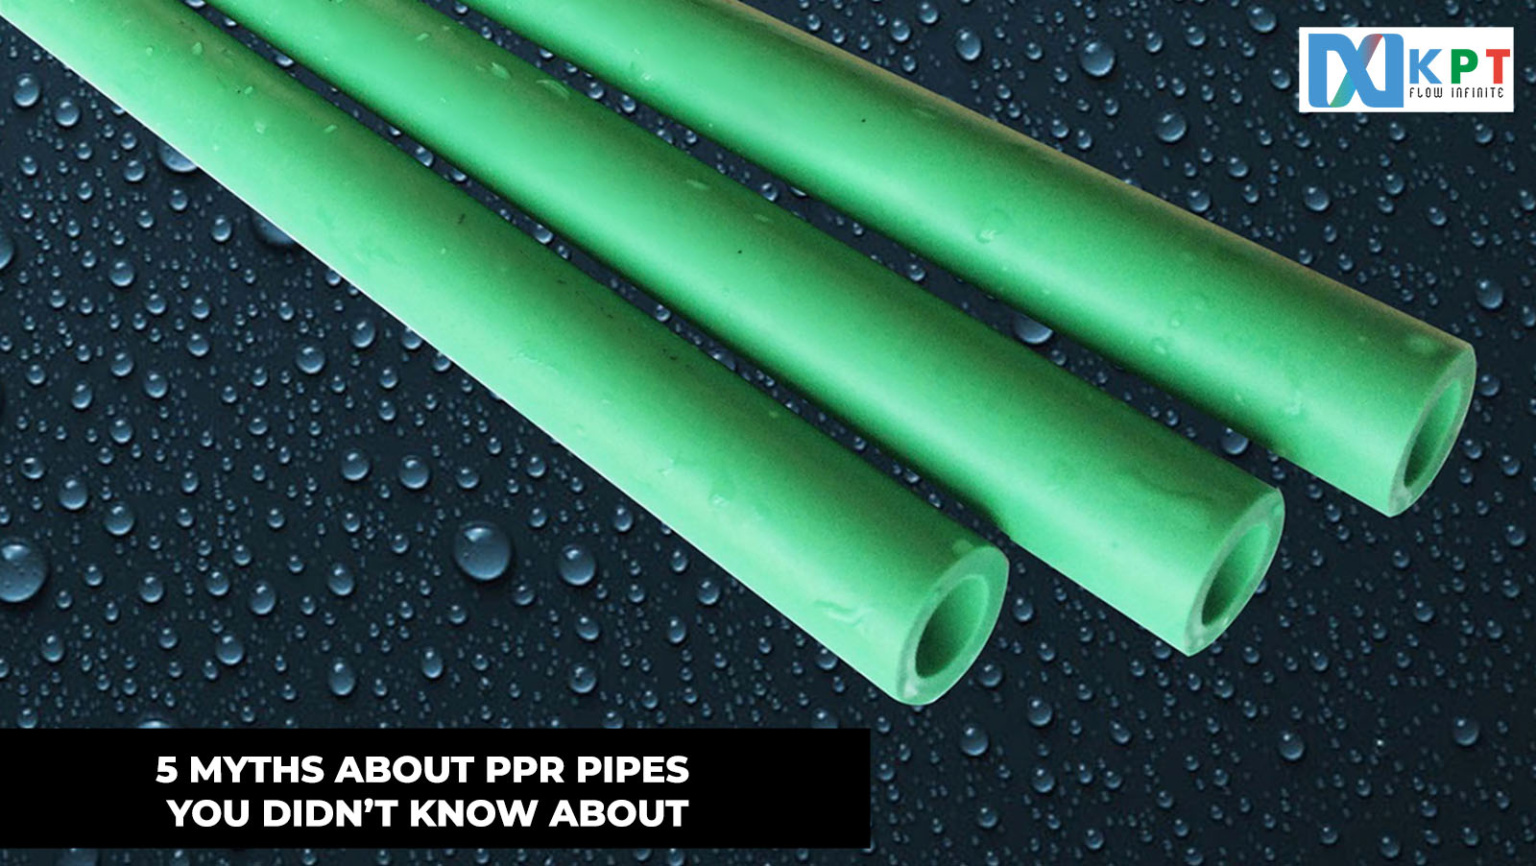 5 myths about PPR Pipes